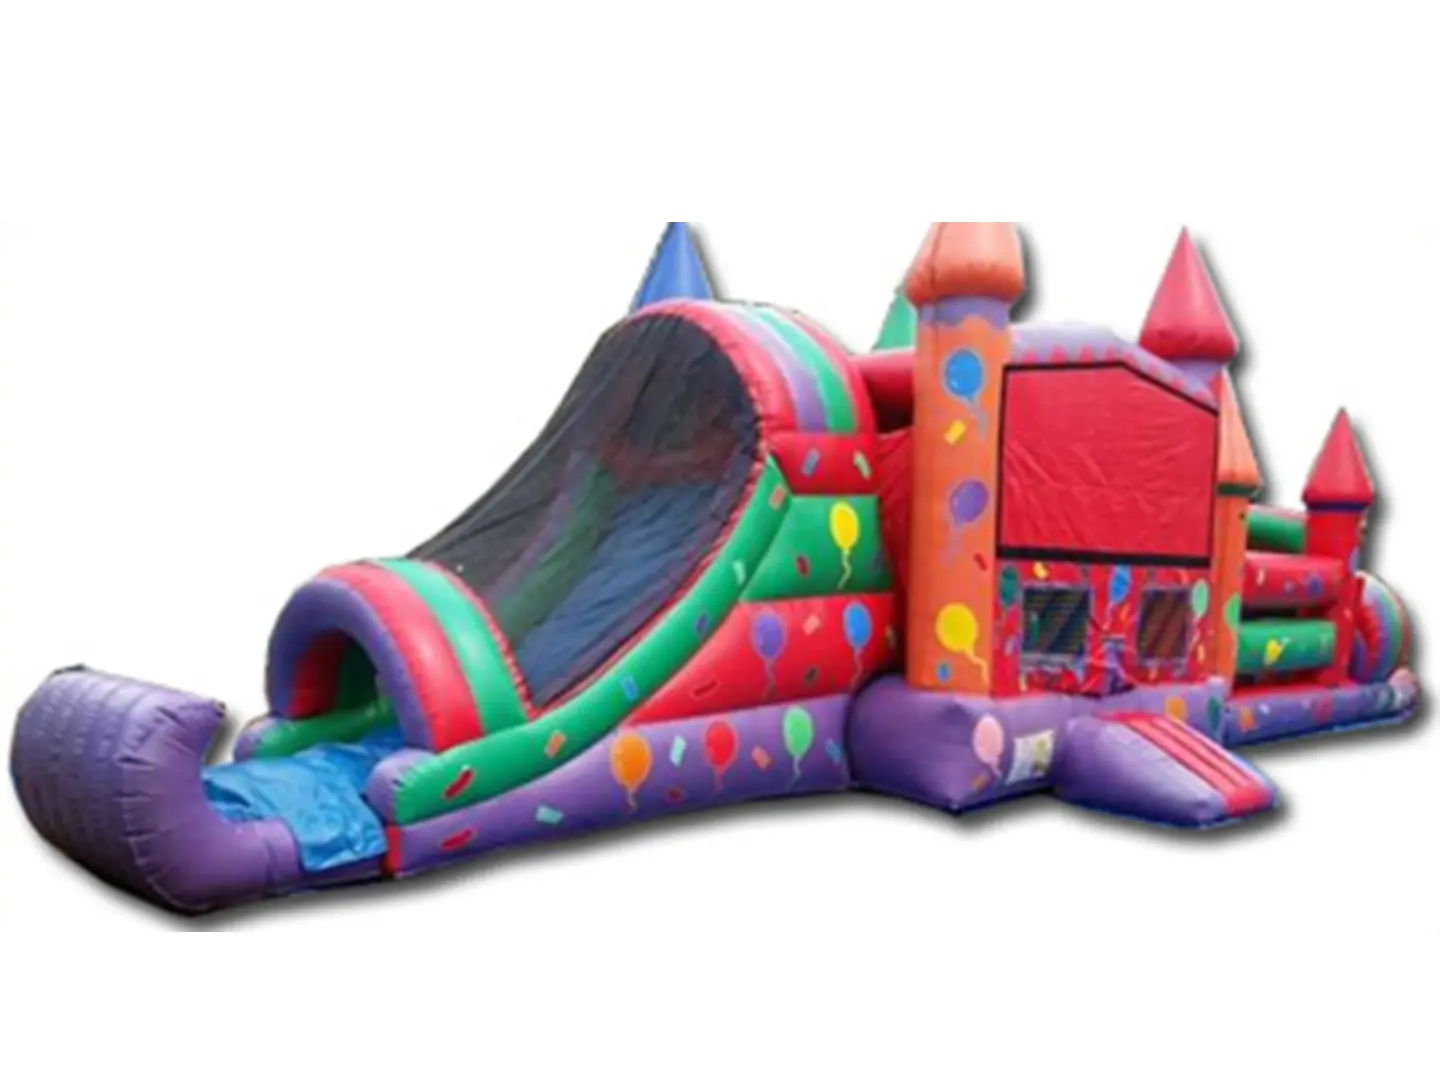 A colorful inflatable castle with slide and obstacles.